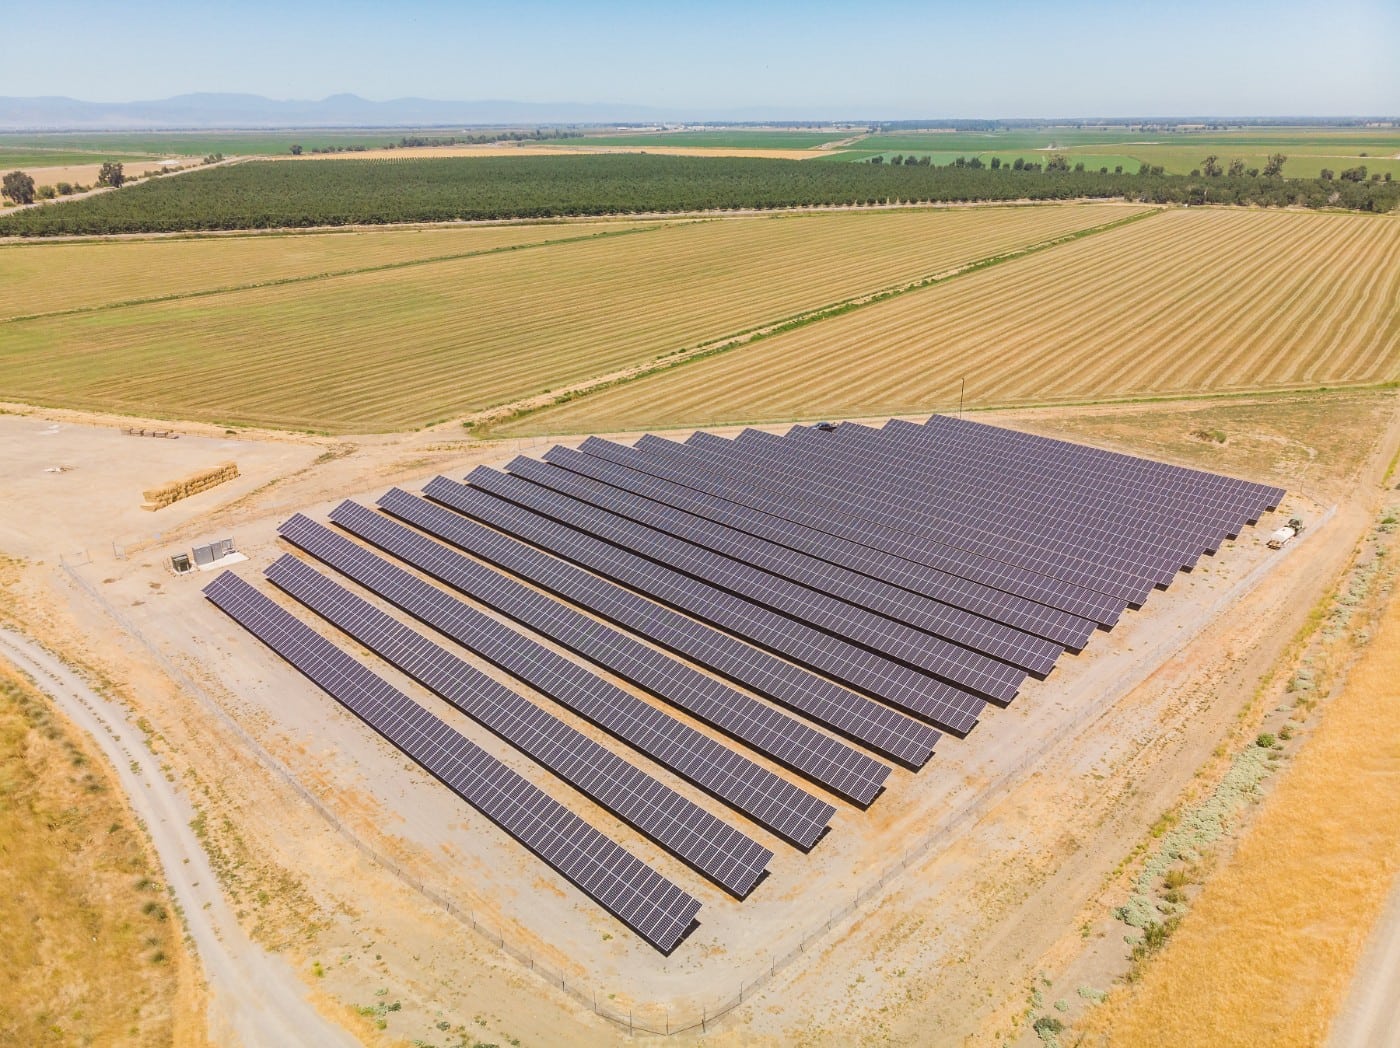 Aerial view of the solar farm constructed at Sycamore Mutual Water Company surrounded by green crop fields and cut wheat fields.